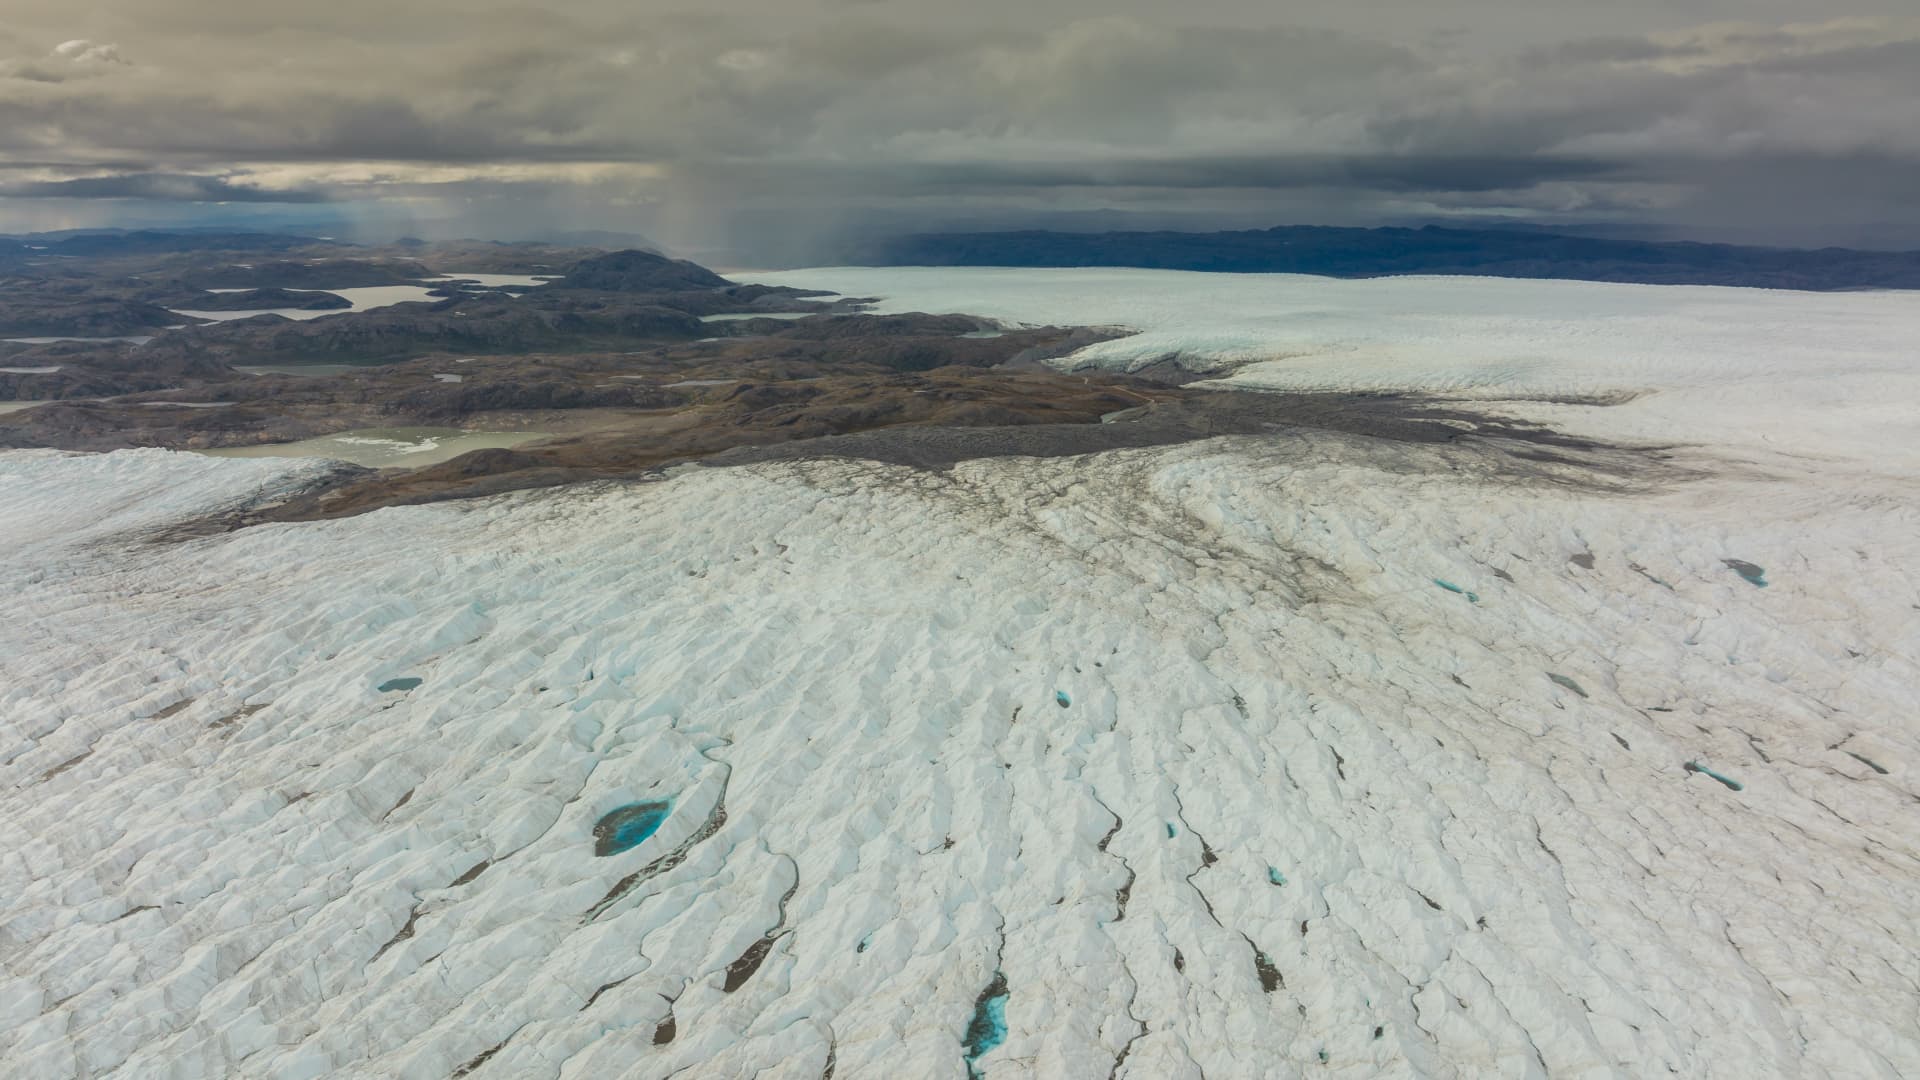 We’re halfway to a tipping point that would trigger 6 feet of sea level rise from melting of the Greenland Ice Sheet